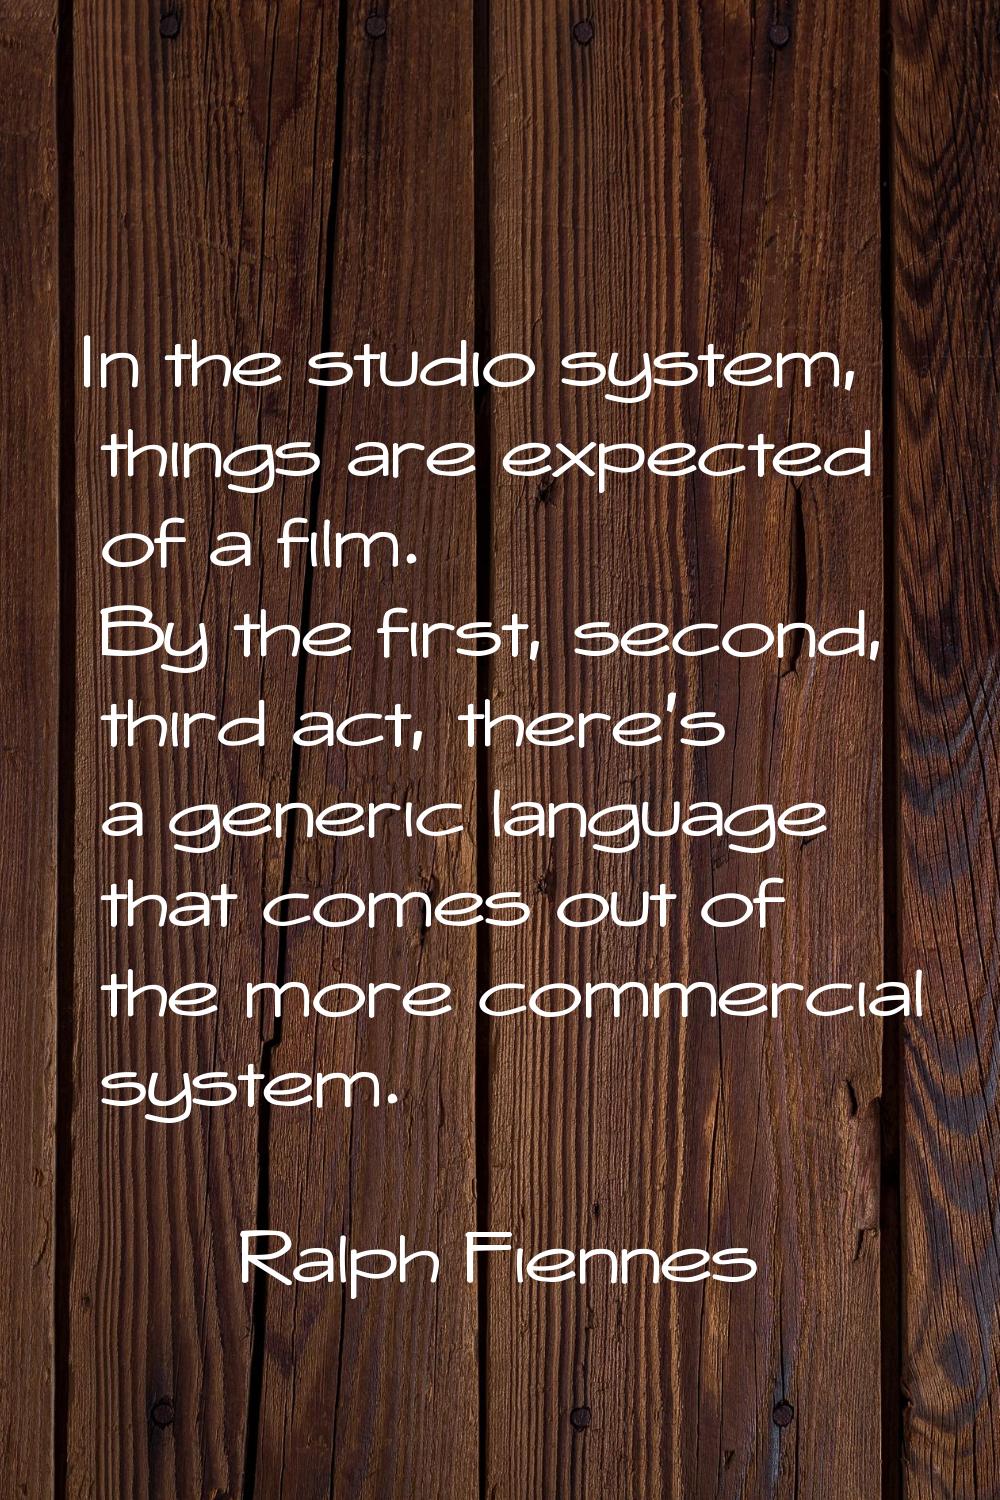 In the studio system, things are expected of a film. By the first, second, third act, there's a gen